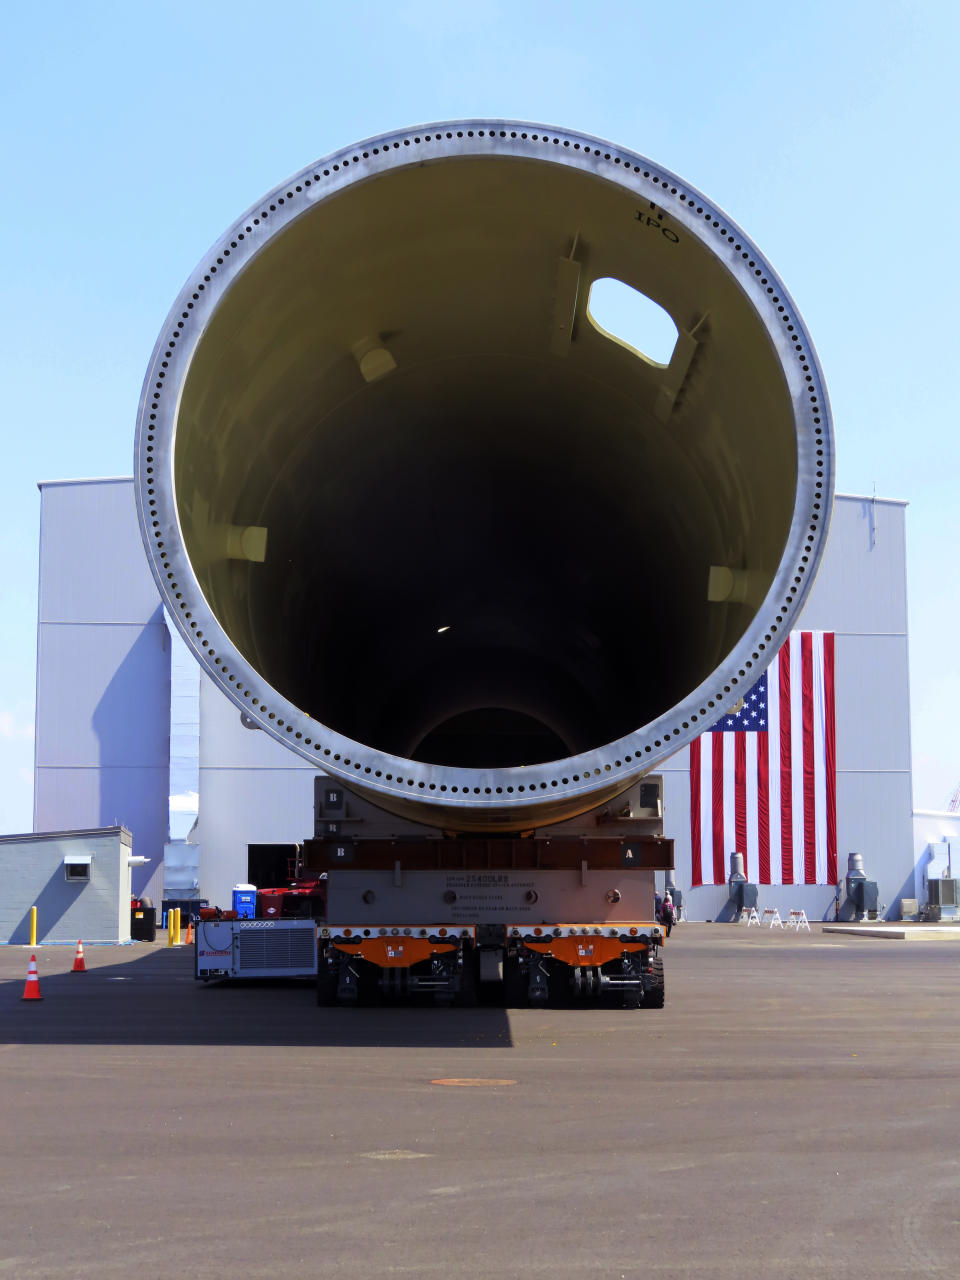 A giant monopile, the foundation for an offshore wind turbine, sits on rollers at the Paulsboro Marine Terminal in Paulsboro, N.J. on Thursday, July 6, 2023, when New Jersey Gov. Phil Murphy planned to sign a bill granting a tax break to offshore wind developer Orsted. (AP Photo/Wayne Parry)